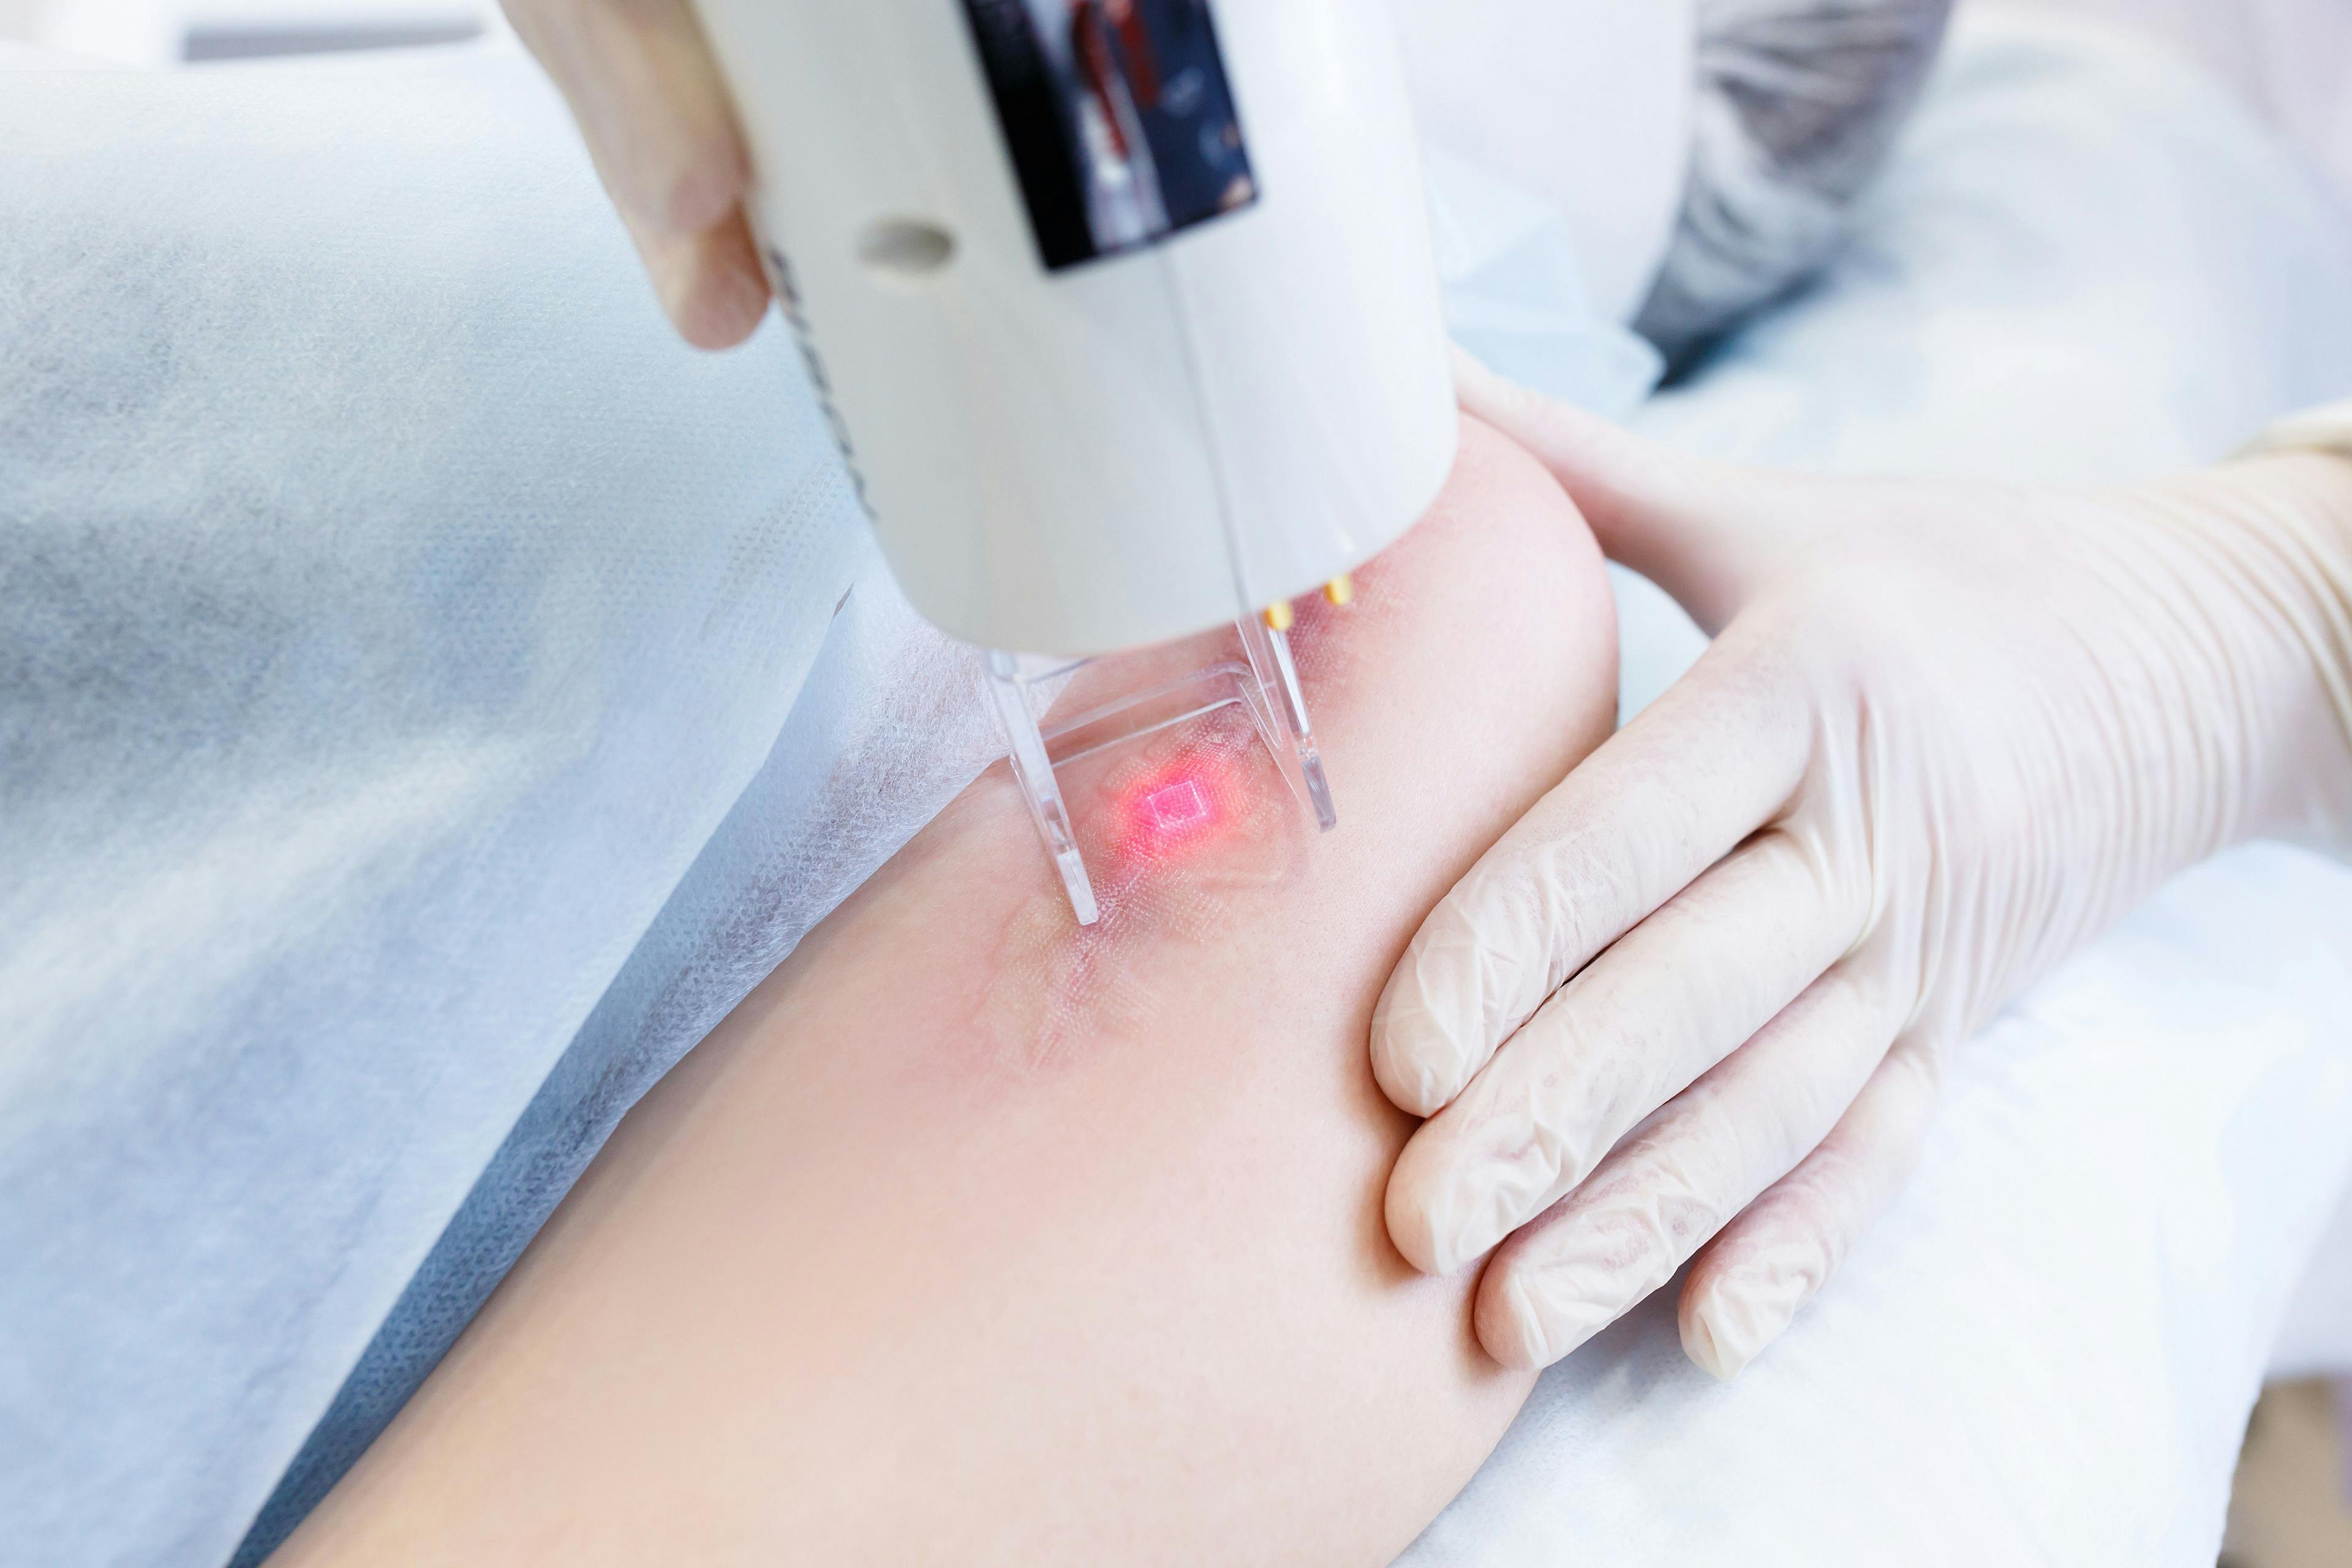 Nonablative Lasers Offer a Gentle Approach to Healthy Skin